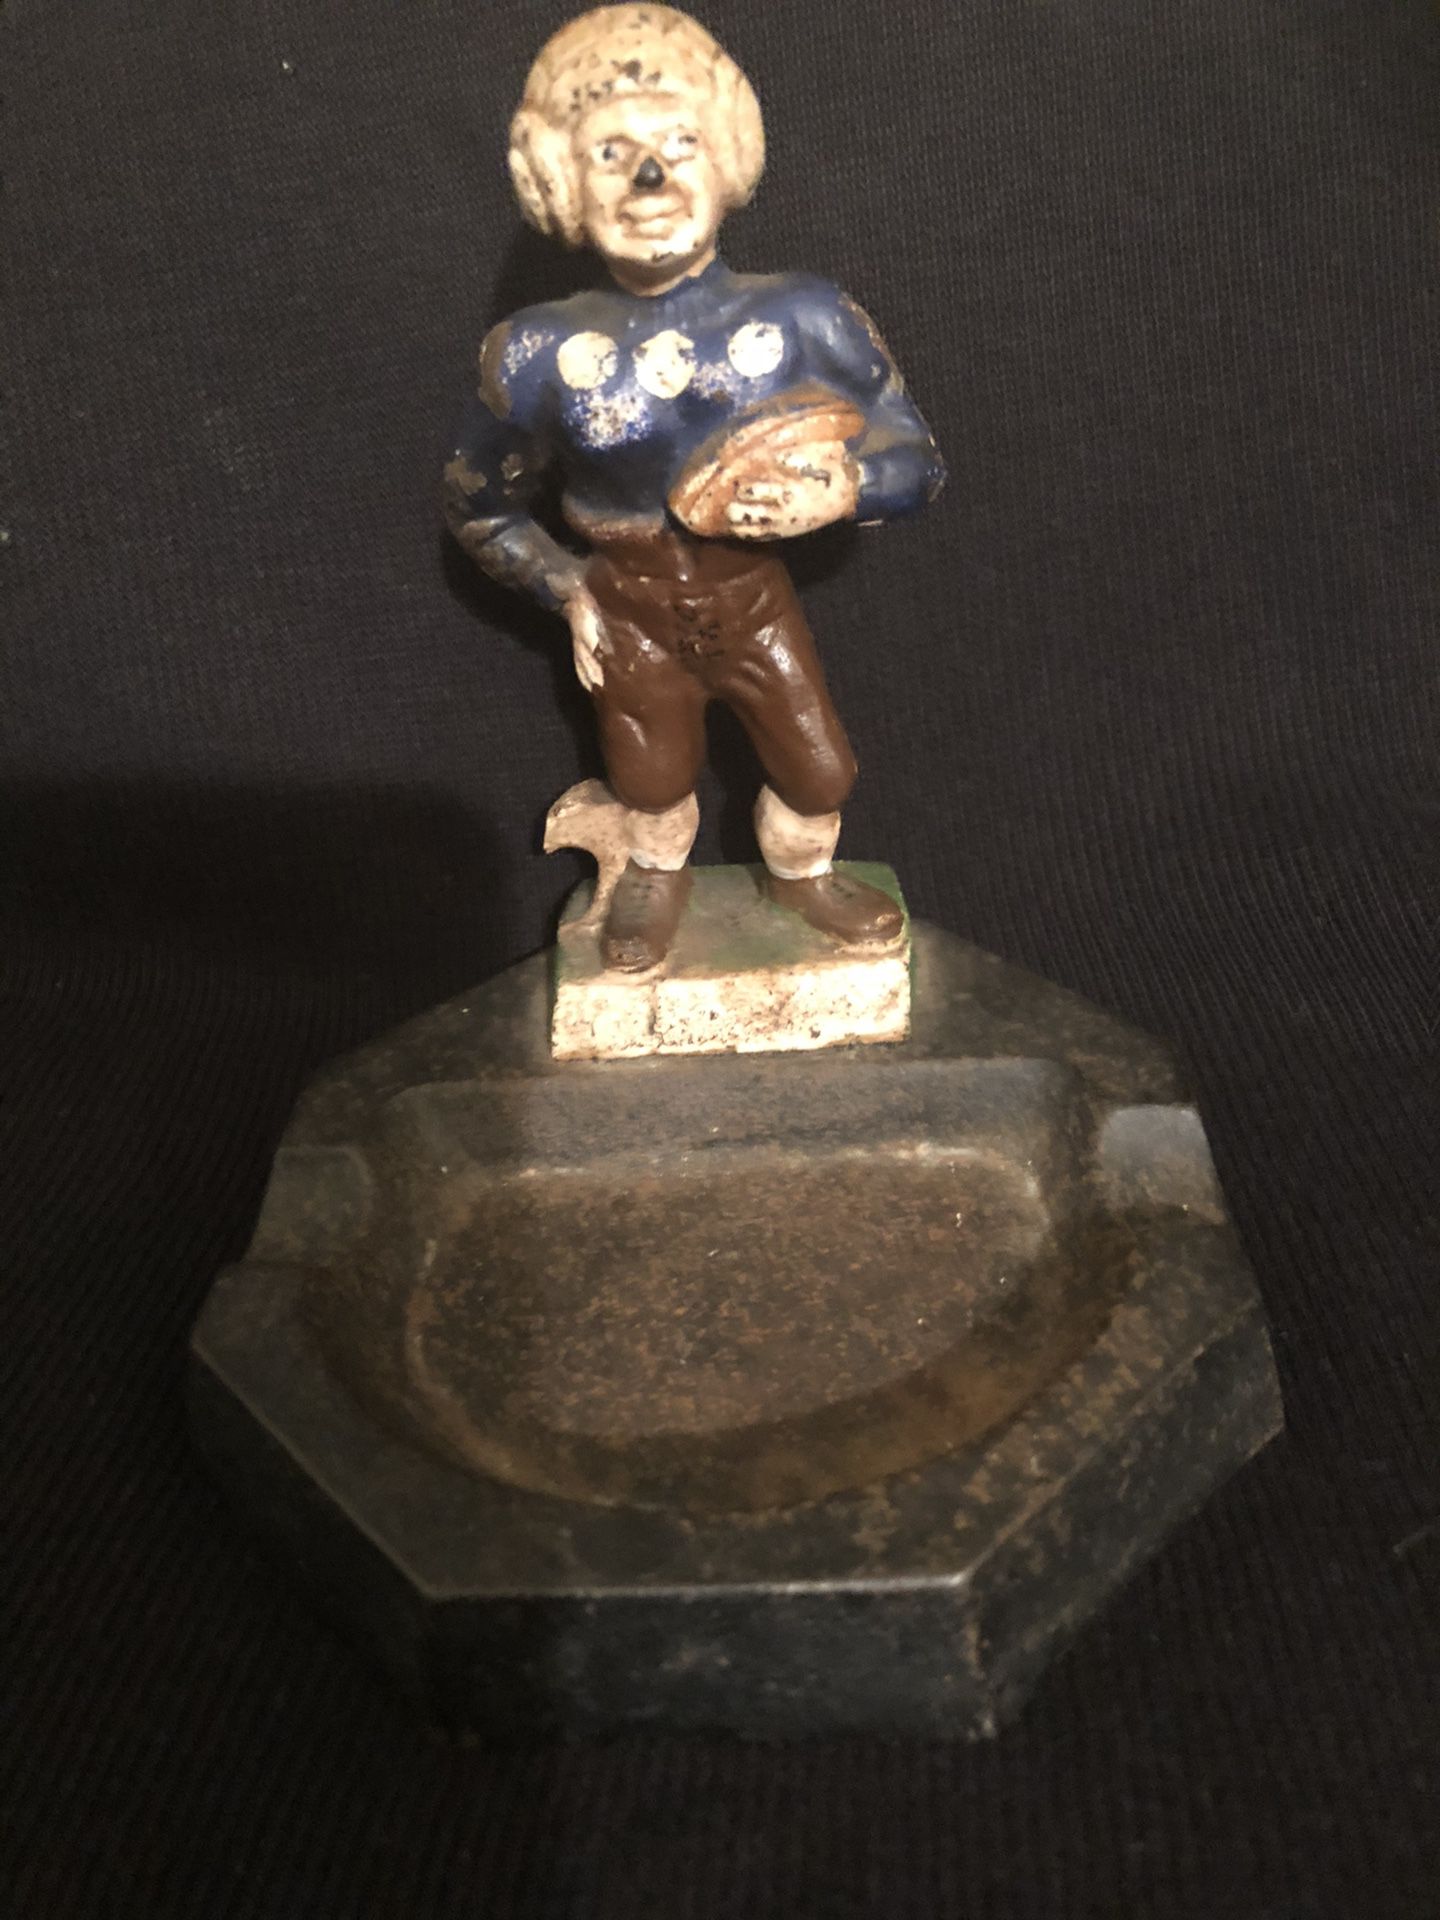 RARE ANTIQUE CAST IRON FOOTBALL PLAYER BOTTLE OPENER/ASHTRAY BY L & L FAVORS